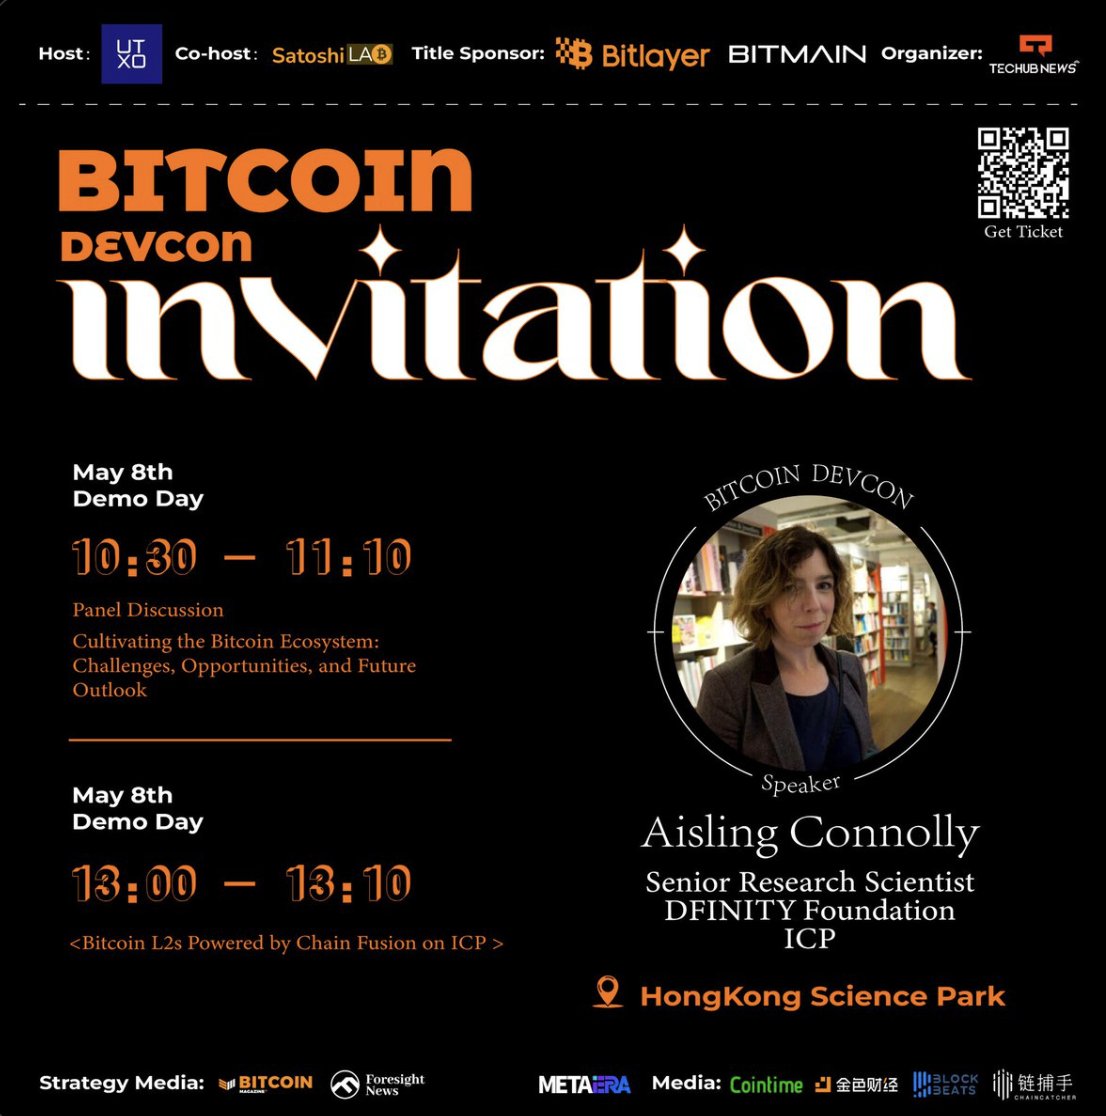 Headed to @bitcoindevcon? Don't miss @aisconnolly as she talks about challenges and opportunities in the #Bitcoin ecosystem, Bitcoin L2s powered by Chain Fusion, & much more 🟧